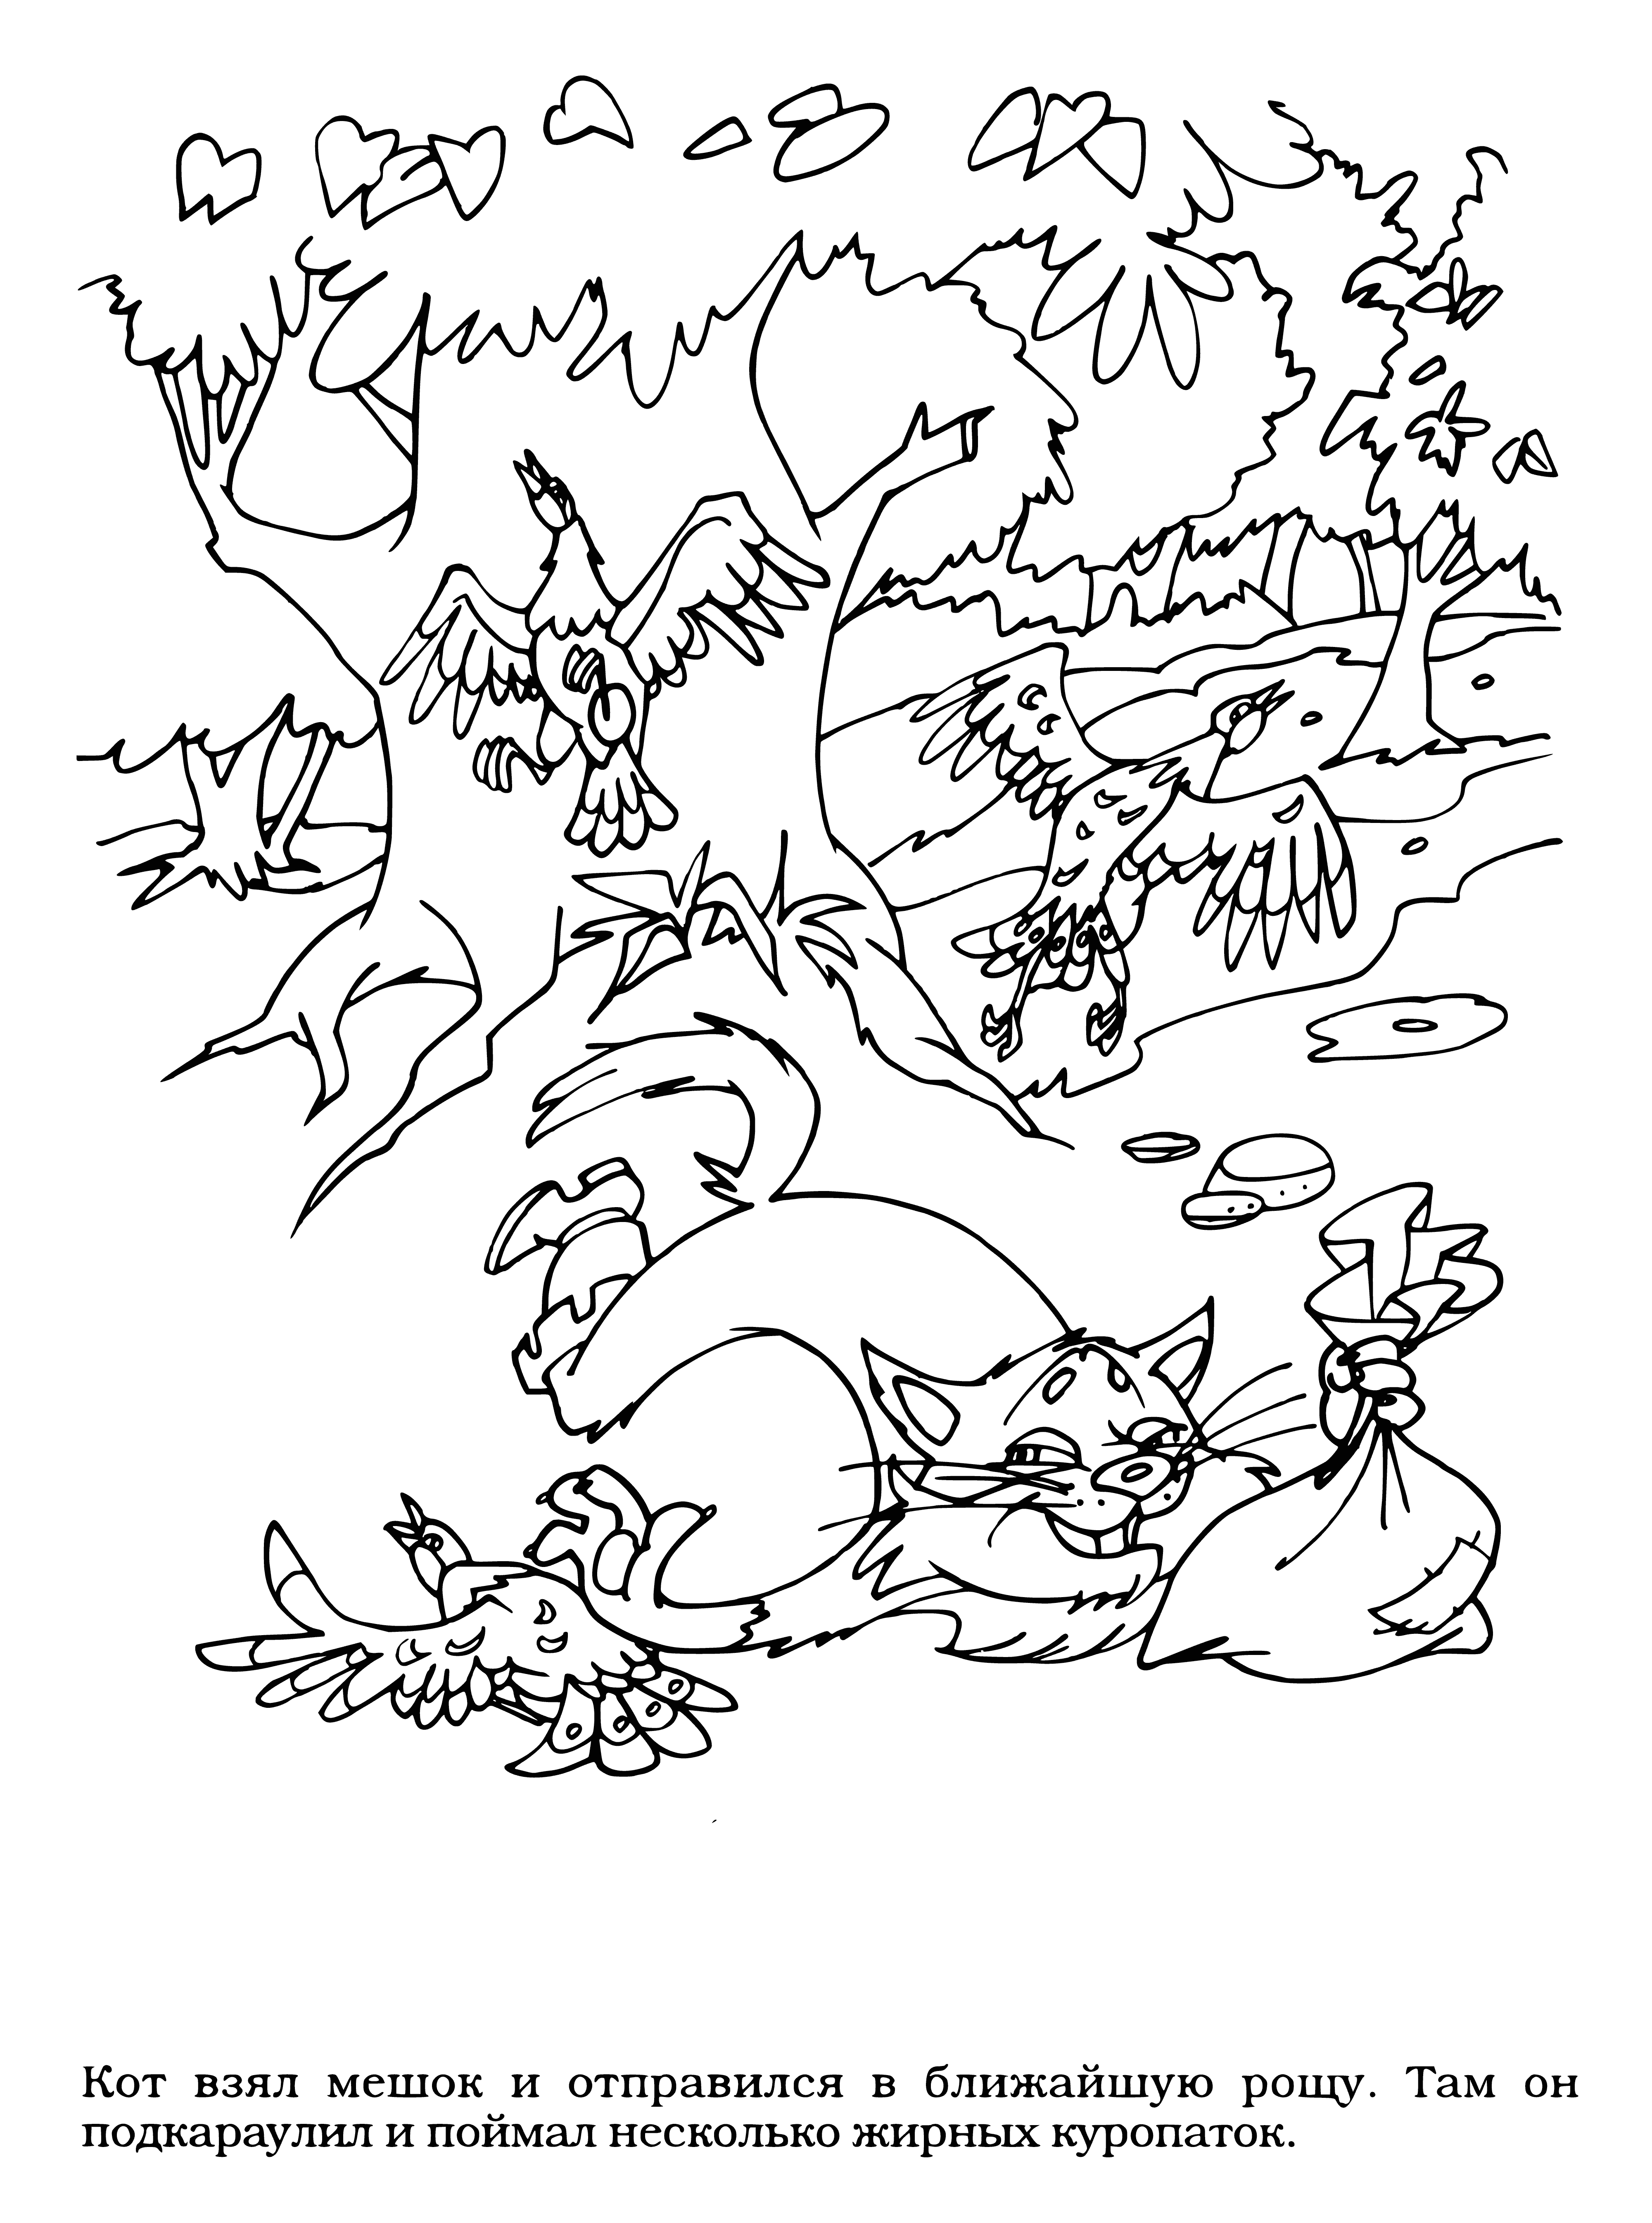 coloring page: Cat is about to bite a scared hedgehog.